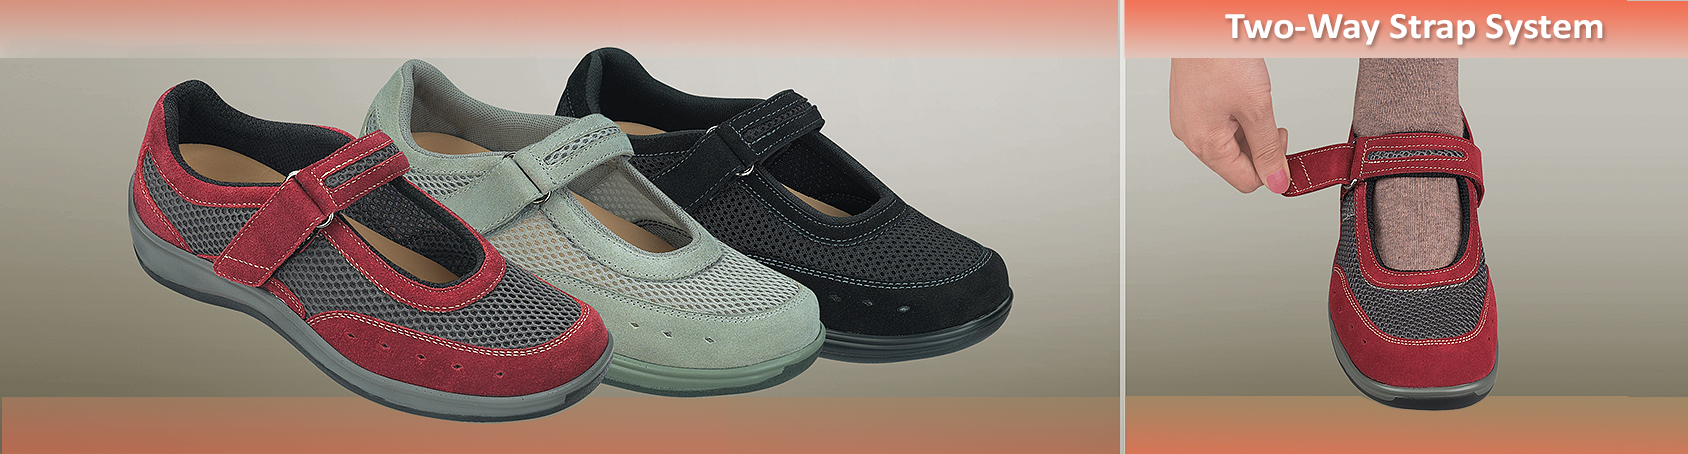 Women's comfort shoes, Diabetic shoes, Wide shoes | Orthofeet Online